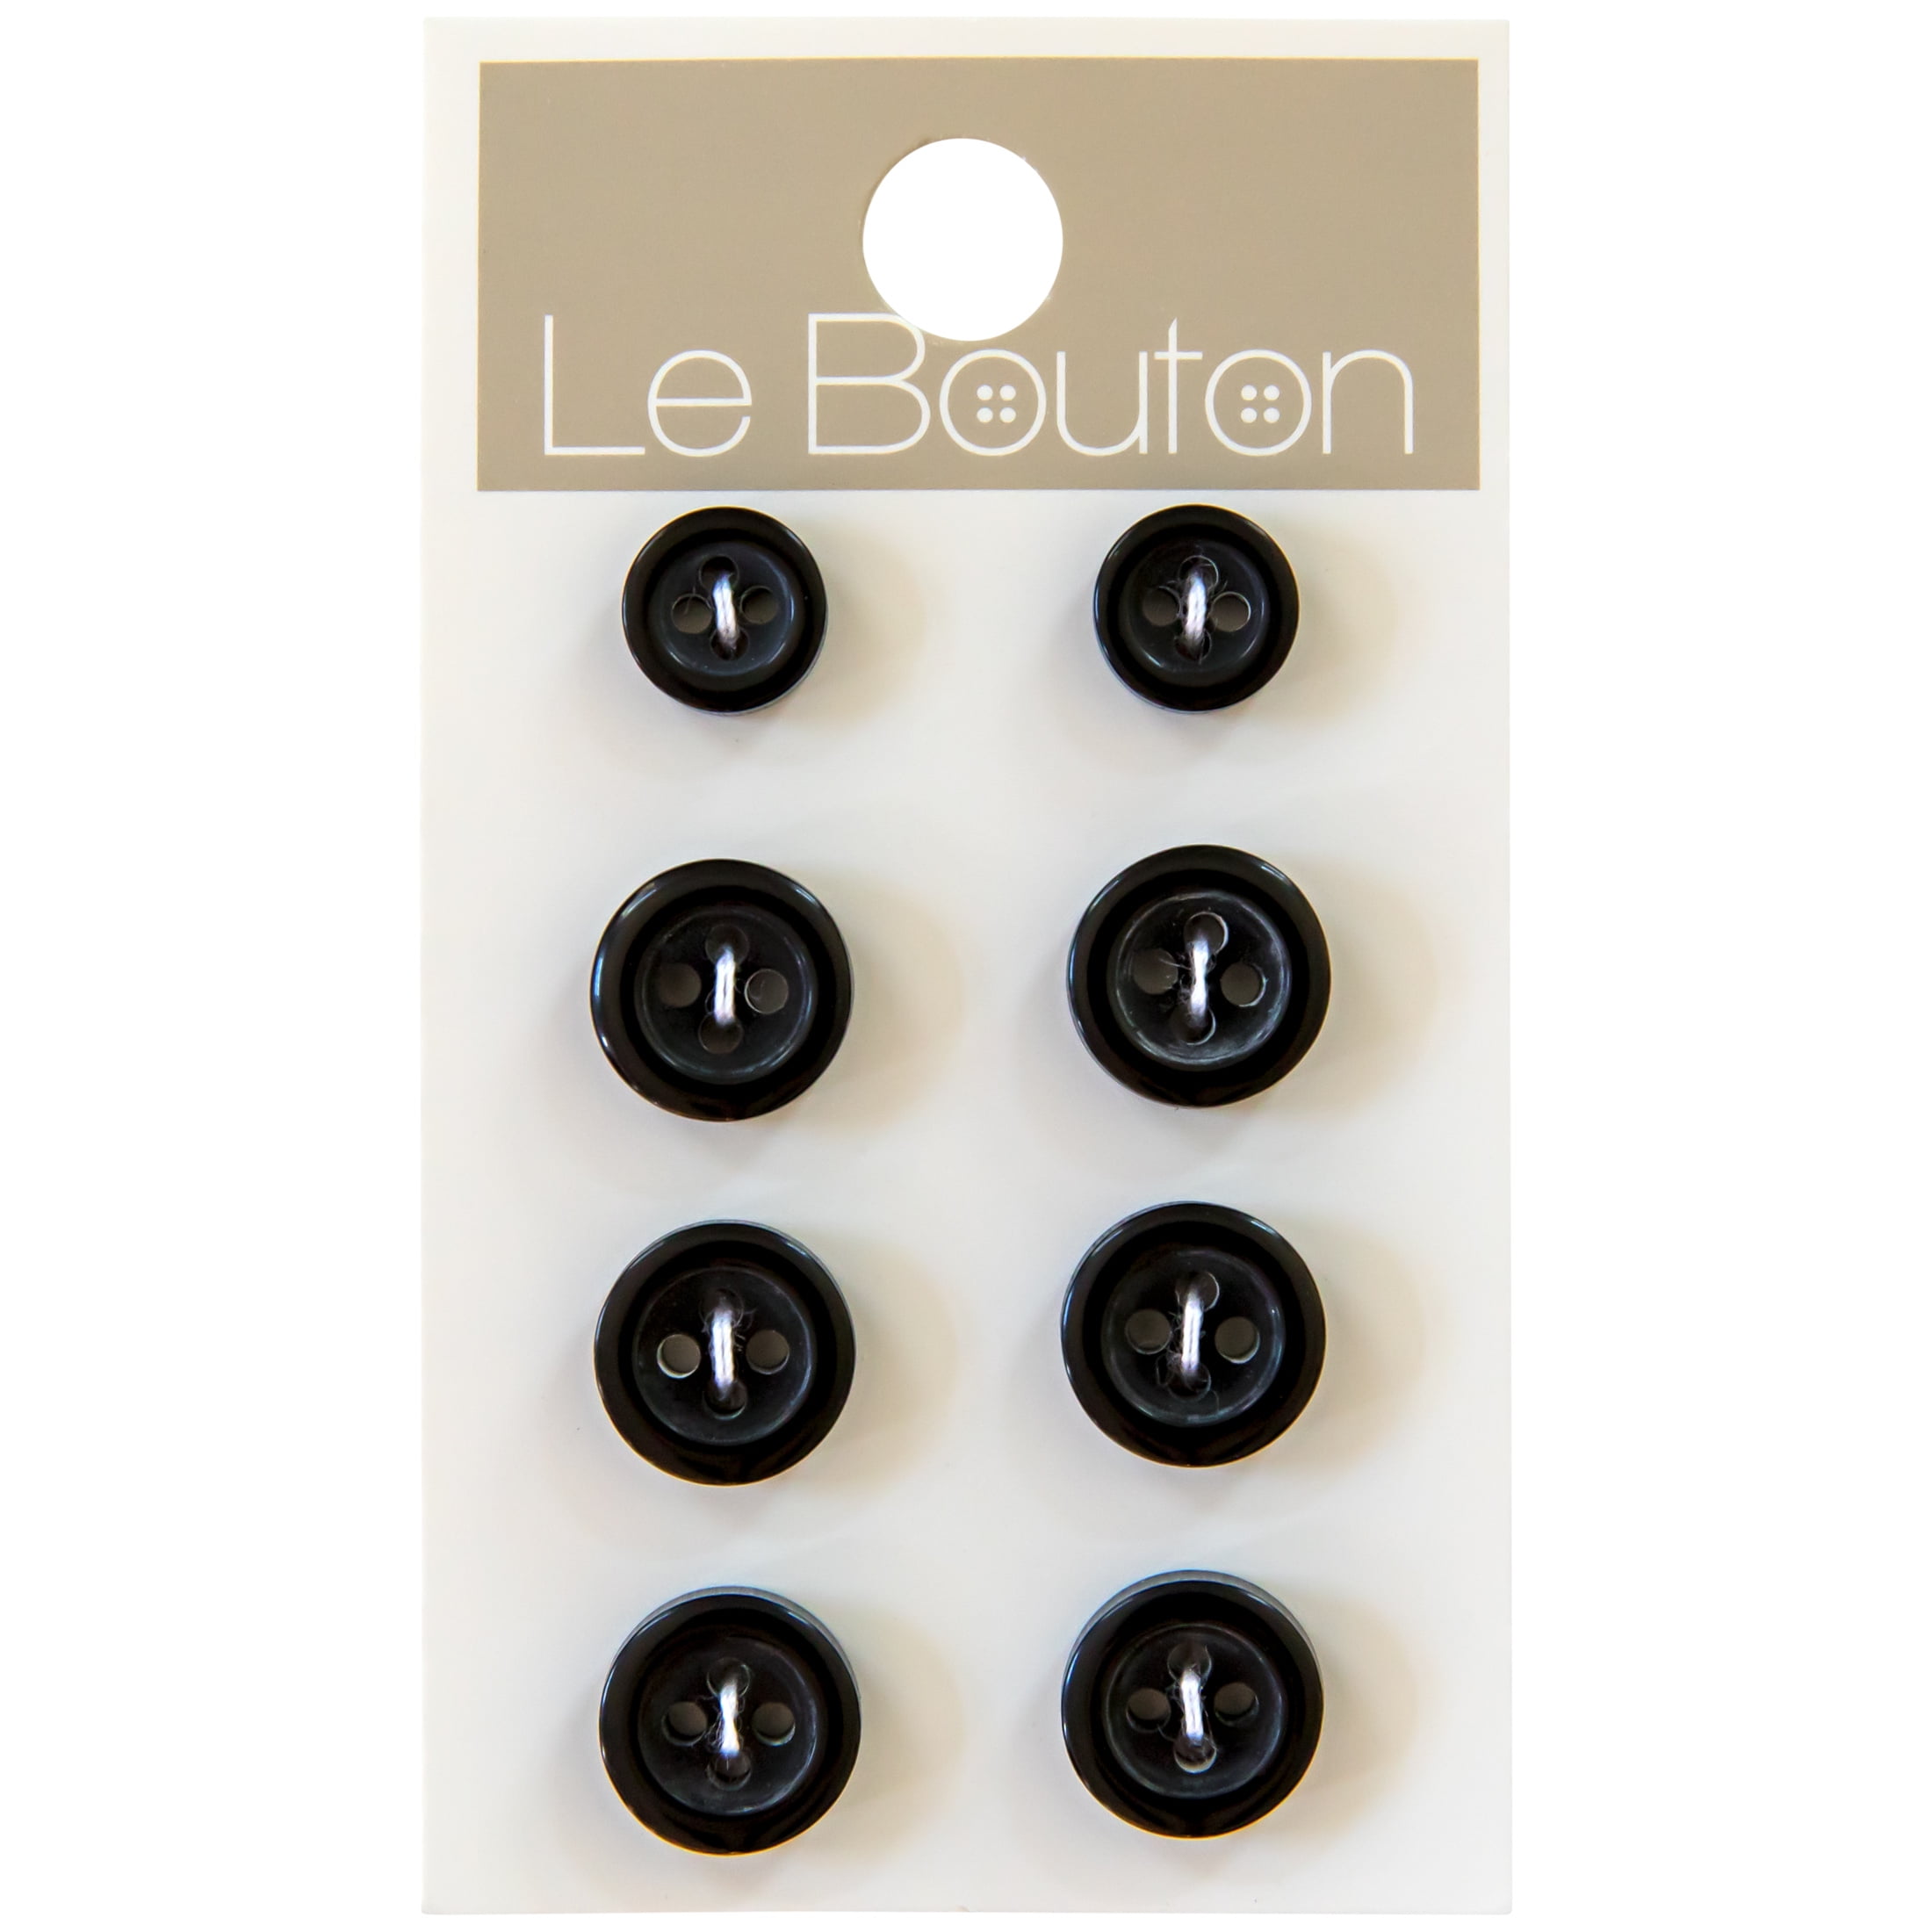 Packet of 20 x Black Resin 20mm Round Buttons 4 Hole